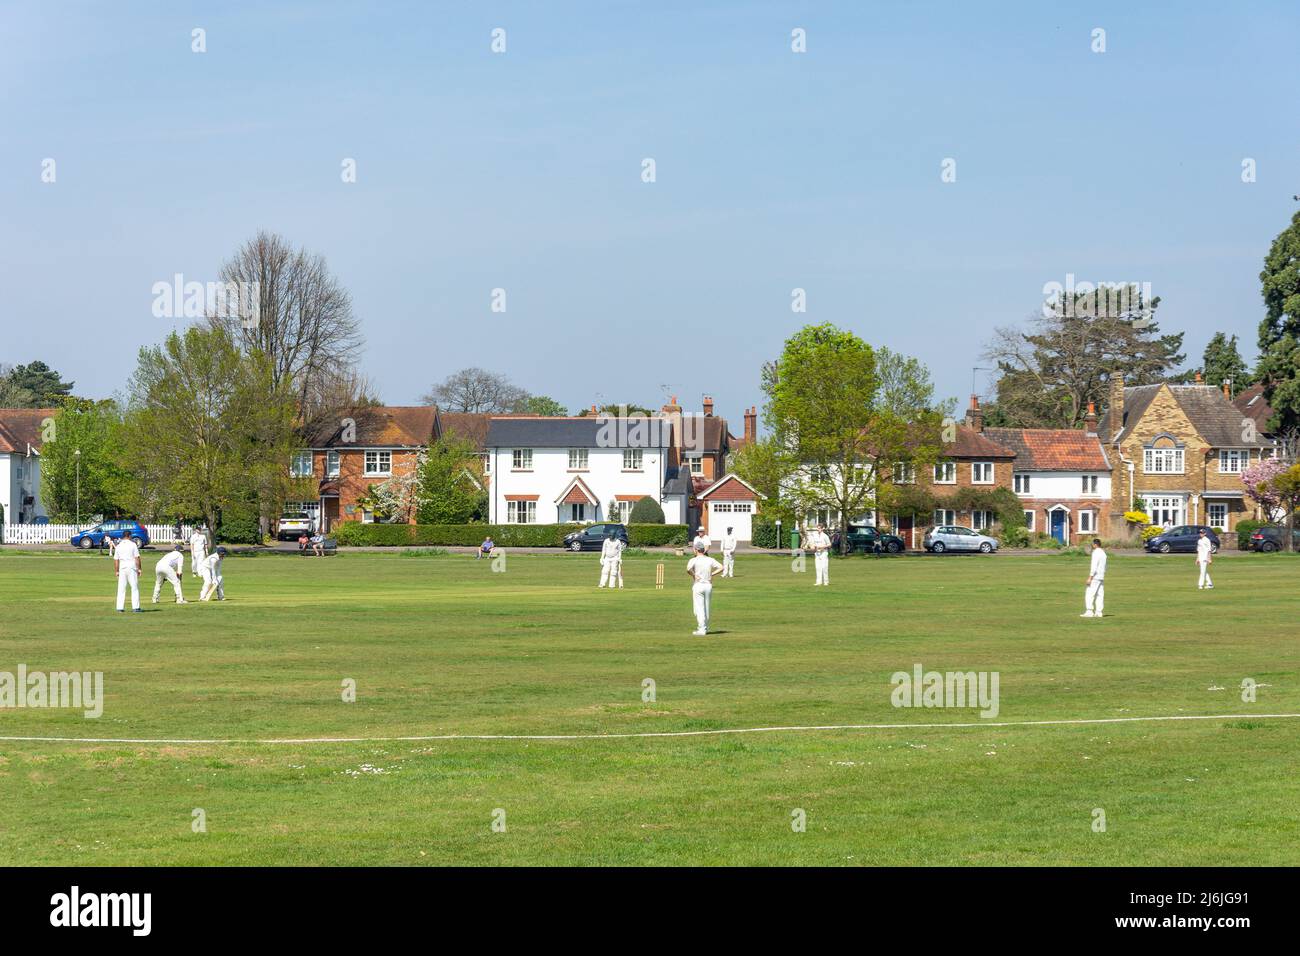 Cricket match on Grigg's Hill Green, Grigg's Hill Road, Thames Ditton, Surrey, England, United Kingdom Stock Photo